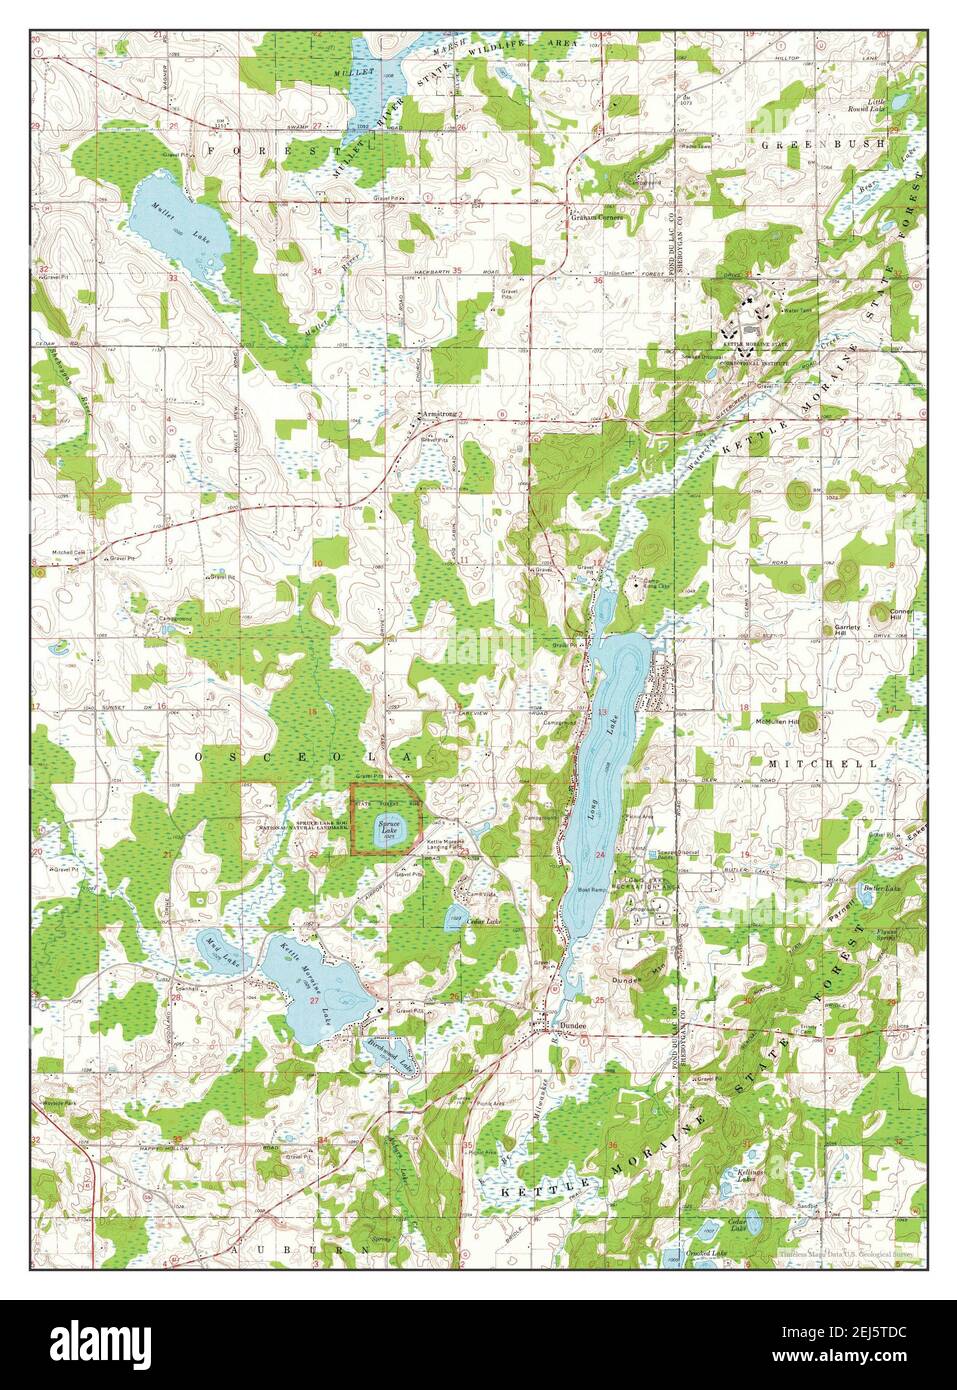 Dundee, Wisconsin, map 1974, 1:24000, United States of America by Timeless Maps, data U.S. Geological Survey Stock Photo